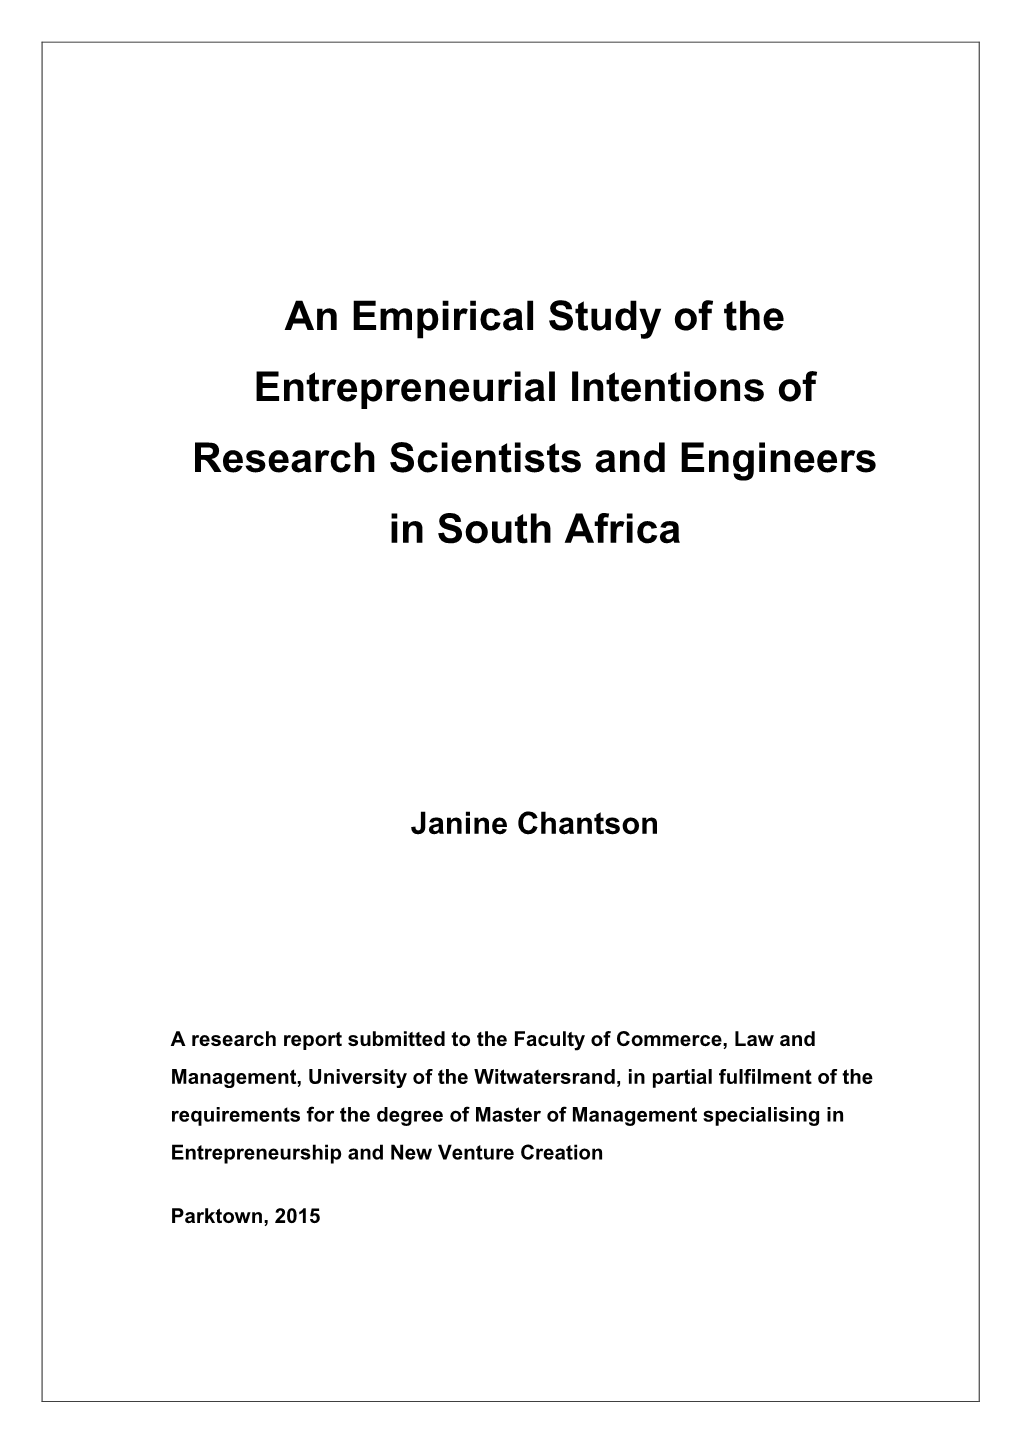 An Empirical Study of the Entrepreneurial Intentions of Research Scientists and Engineers in South Africa